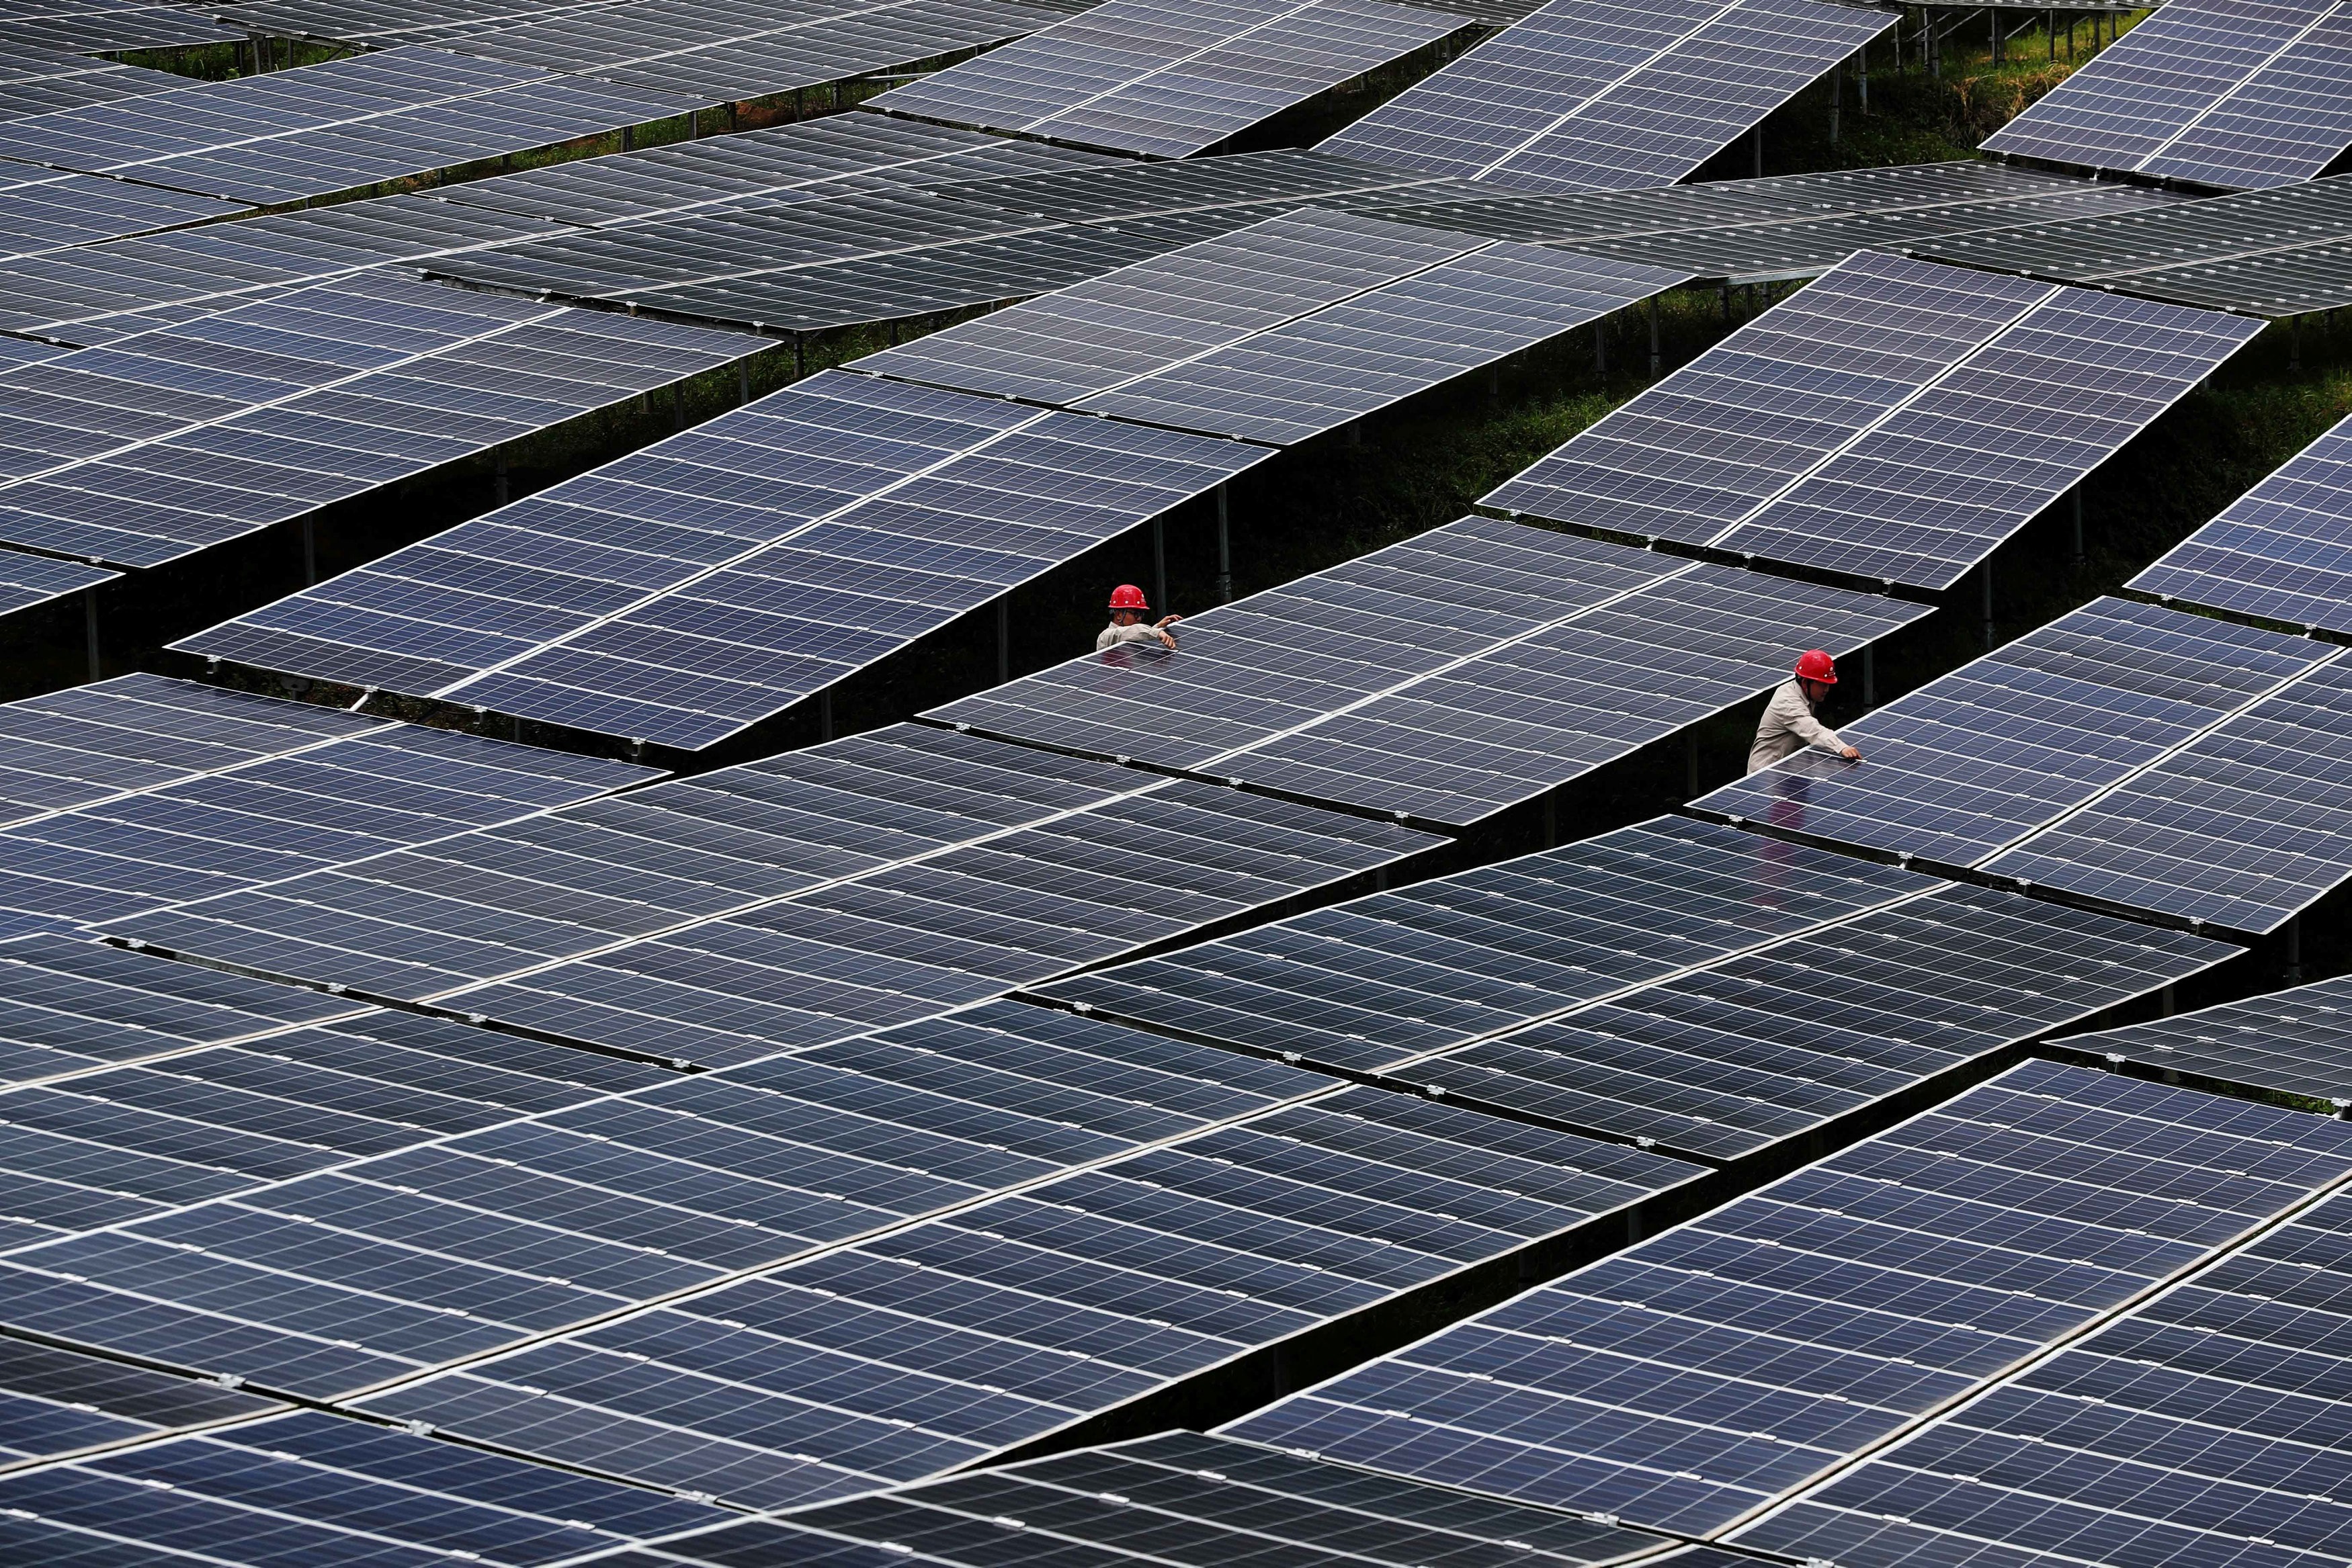 Workers check solar panels at a photovoltaic power station in Chongqing, China, in July 2018. The country installed 53GW of solar power in 2017. Photo: Reuters